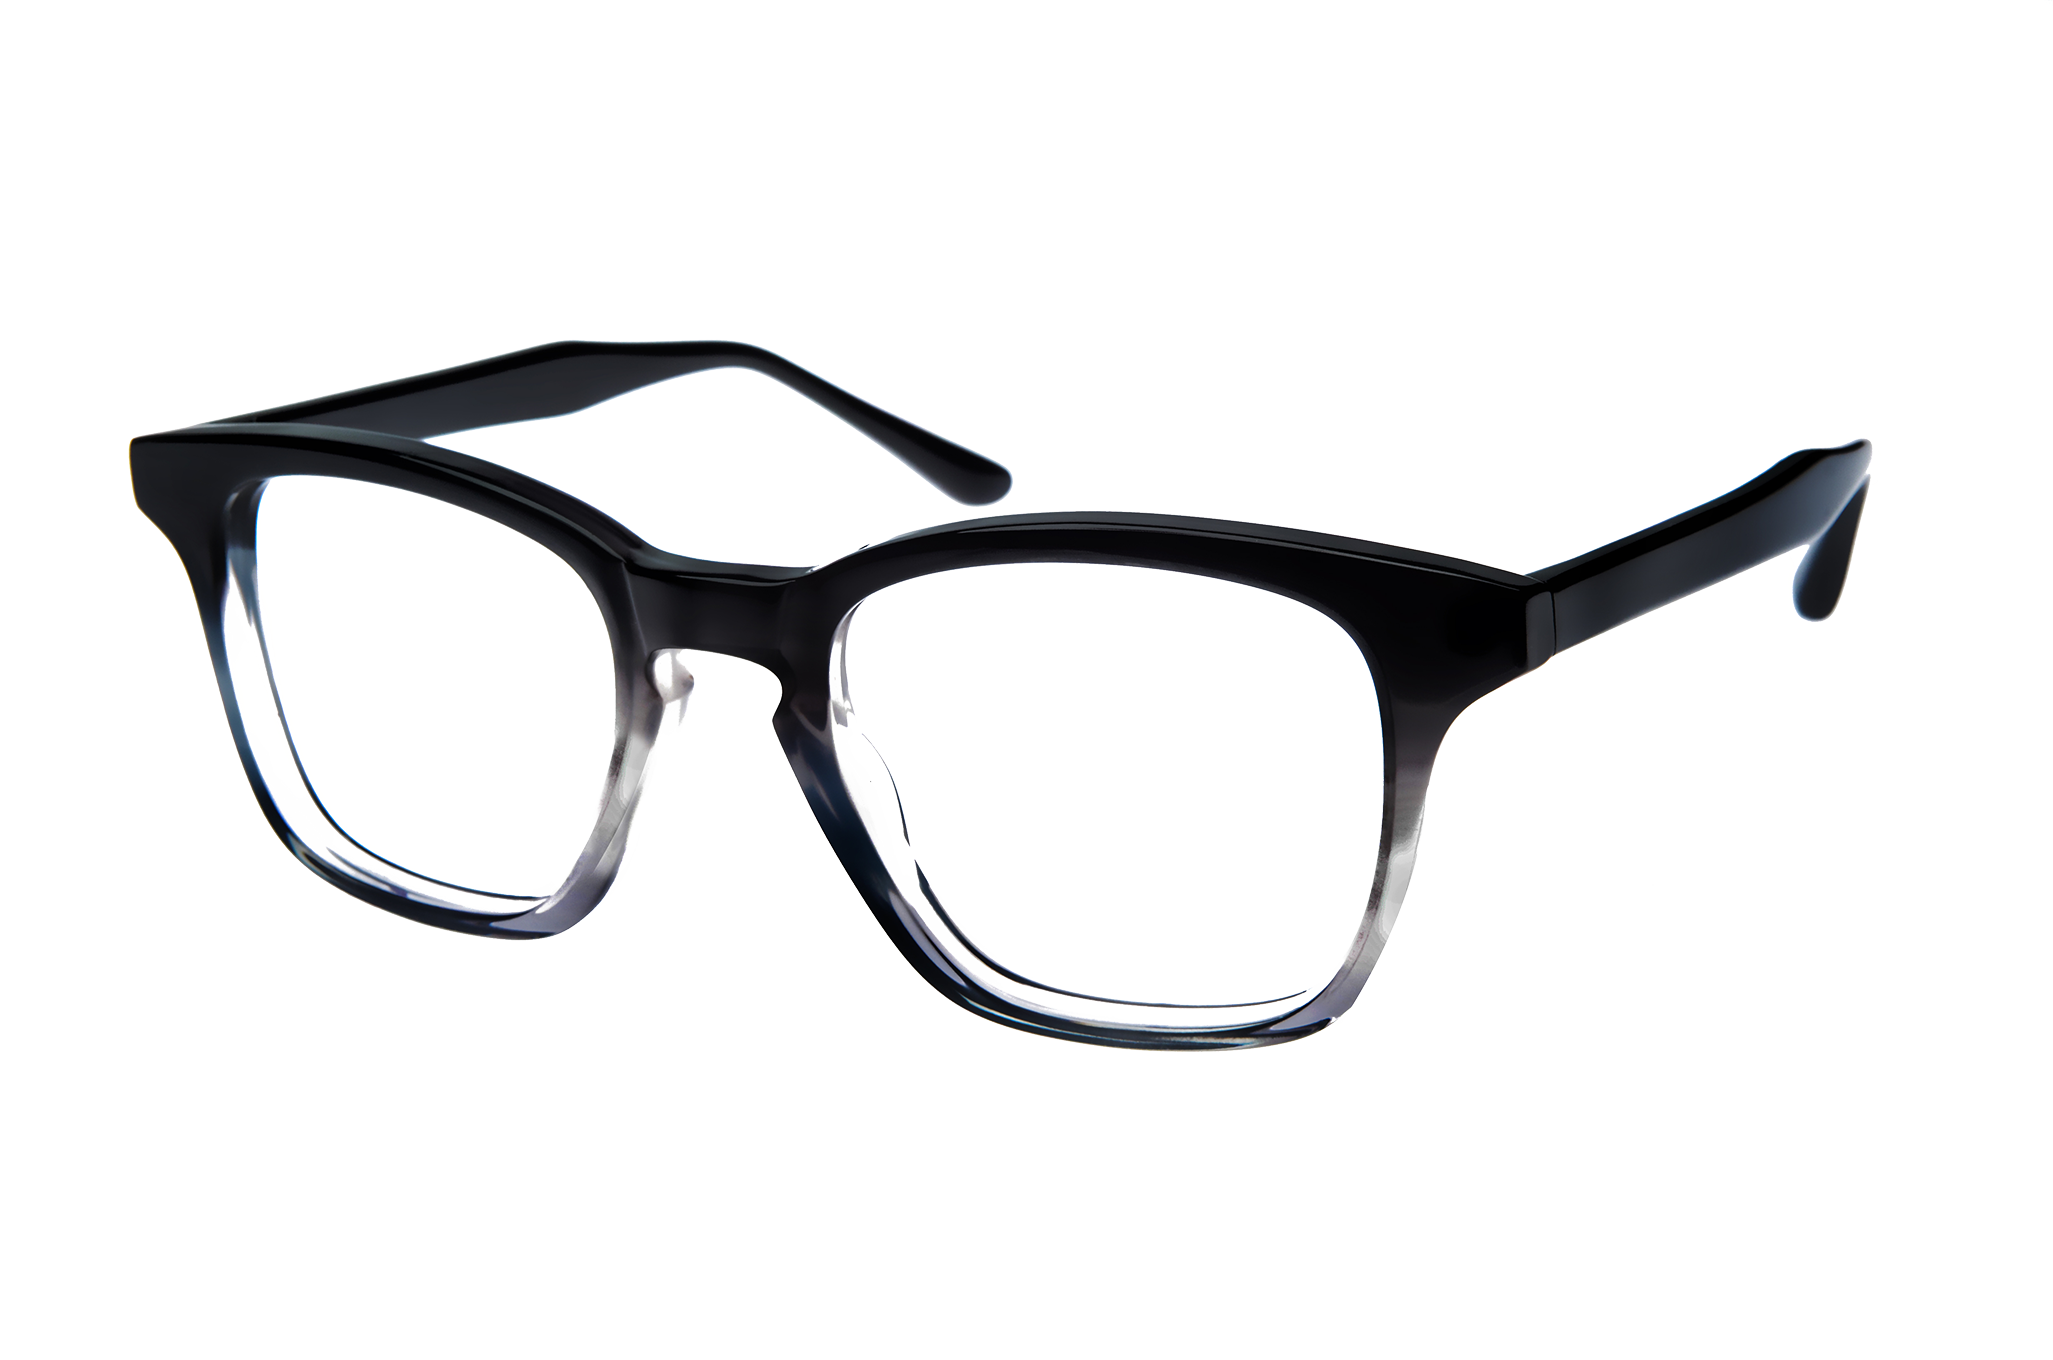 Glasses PNG Image with Transparent Background